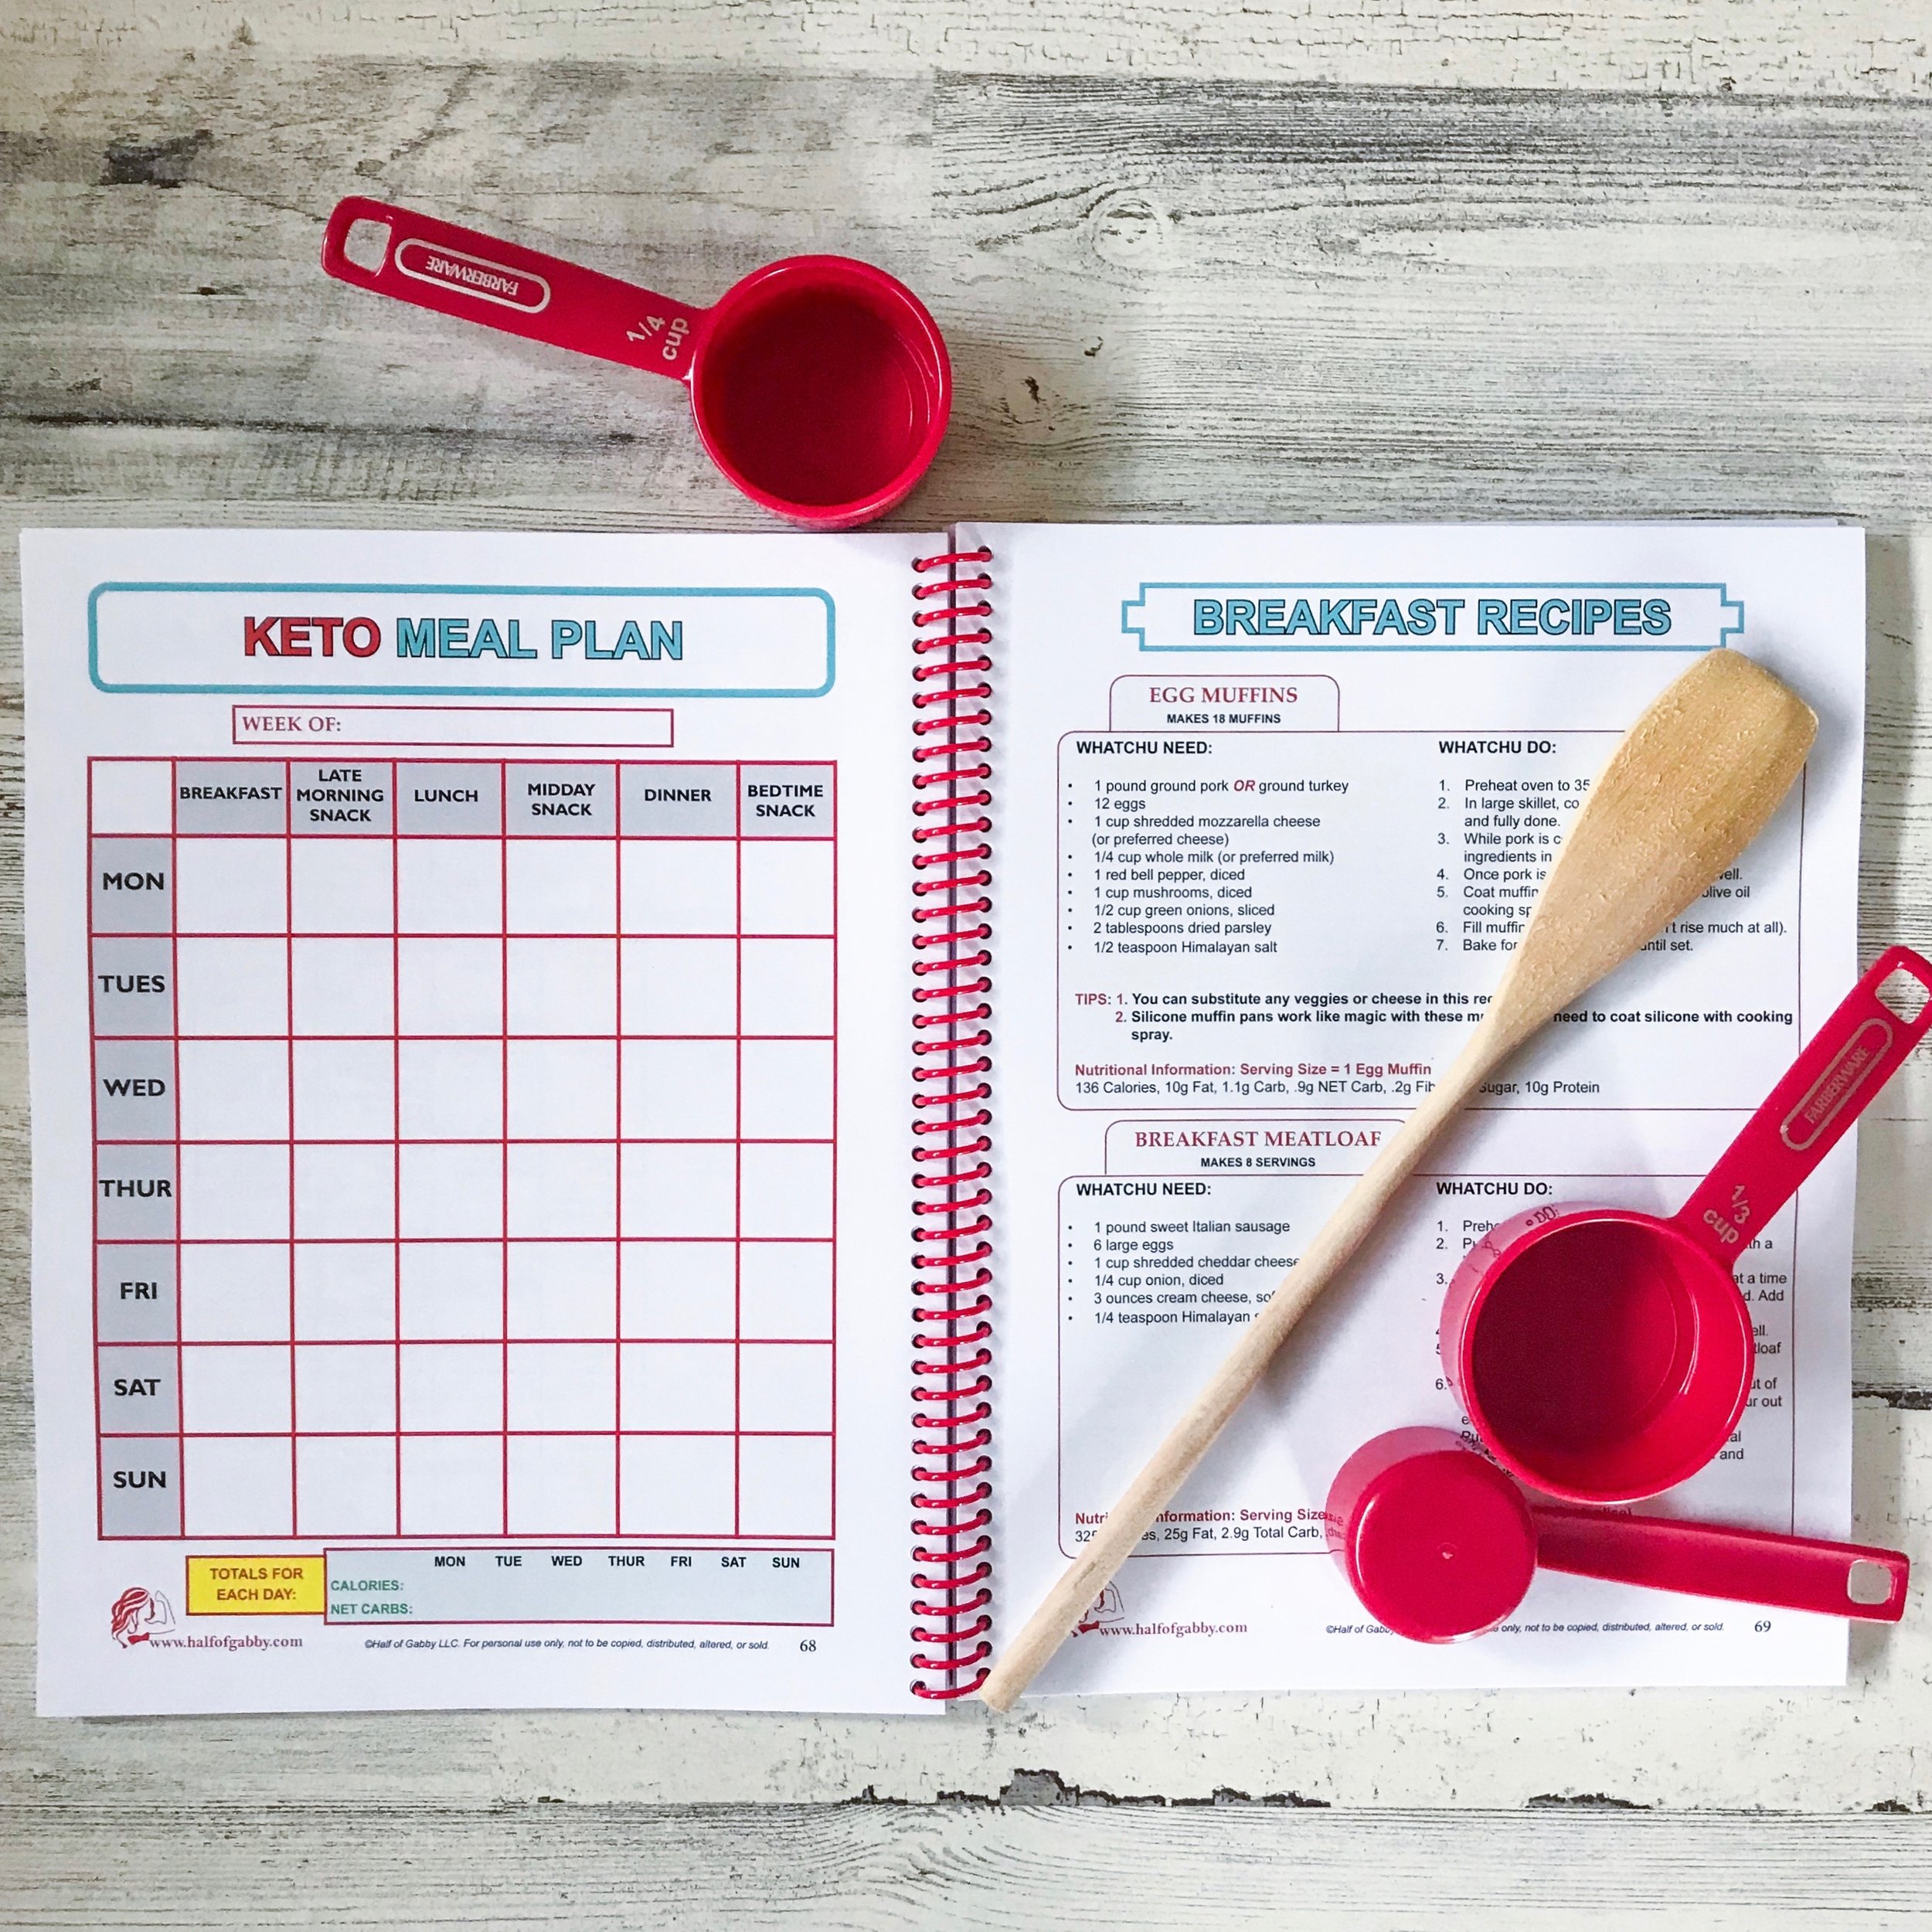 4 Week KETO Meal Plan and Prepping Guide